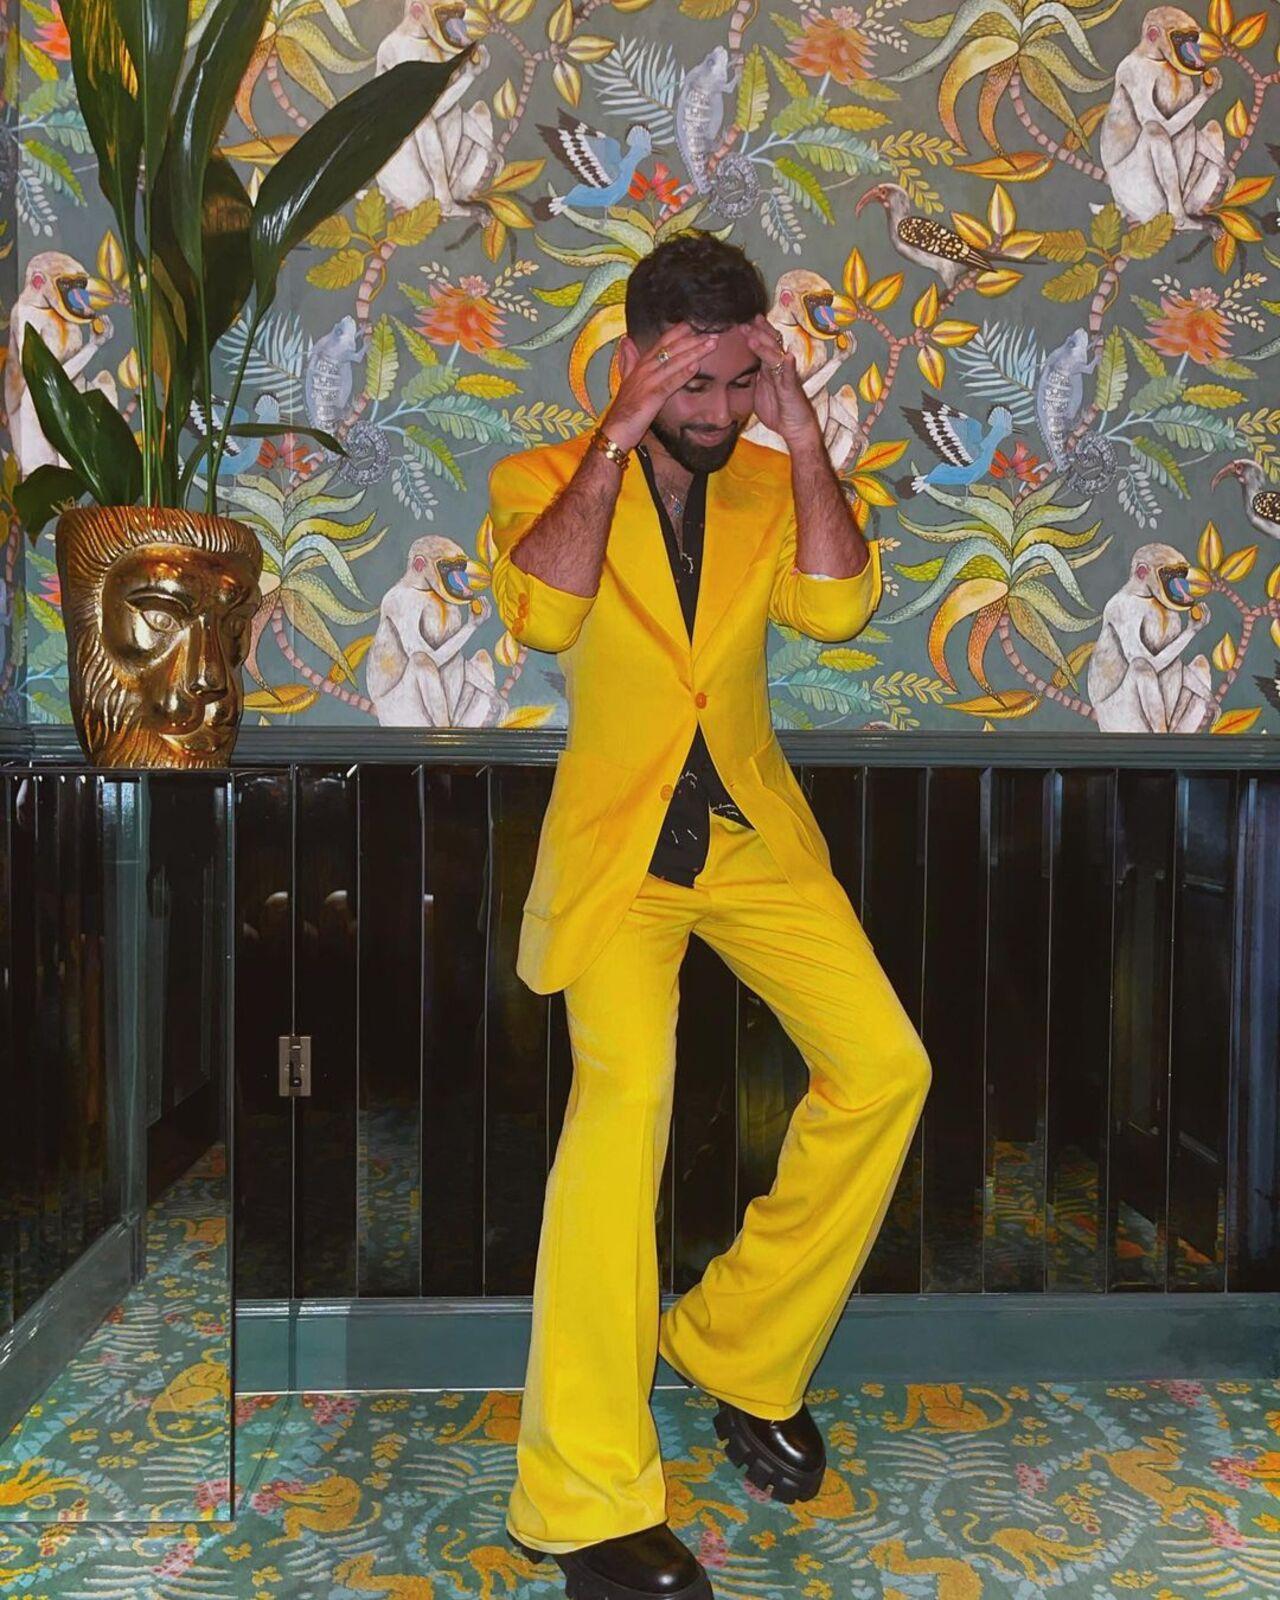 Orry's wardrobe is sure filled with colours and he knows how to pull it off. This yellow suit, a reminder of Jim Carrey's look from The Mask, is perfect for your sunny mood